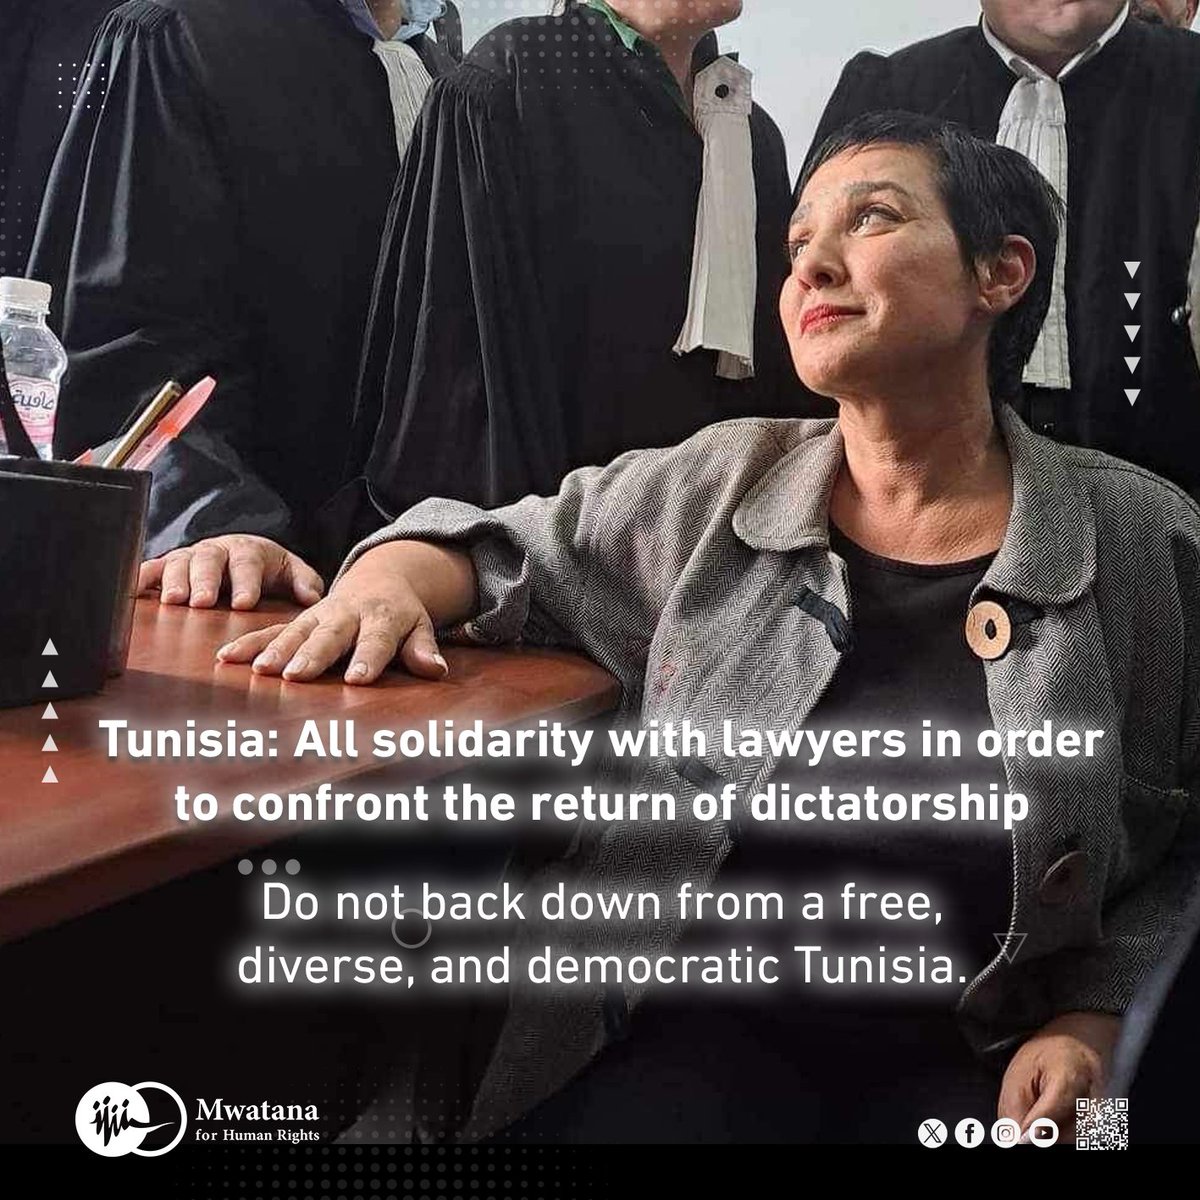 #Tunisia: #Solidarity with #Lawyers in the Fight Against the Return of #Dictatorship Stand Firm for a #Free, #Pluralistic, and #Democratic Tunisia. mwatana.org/posts-en/tunis…